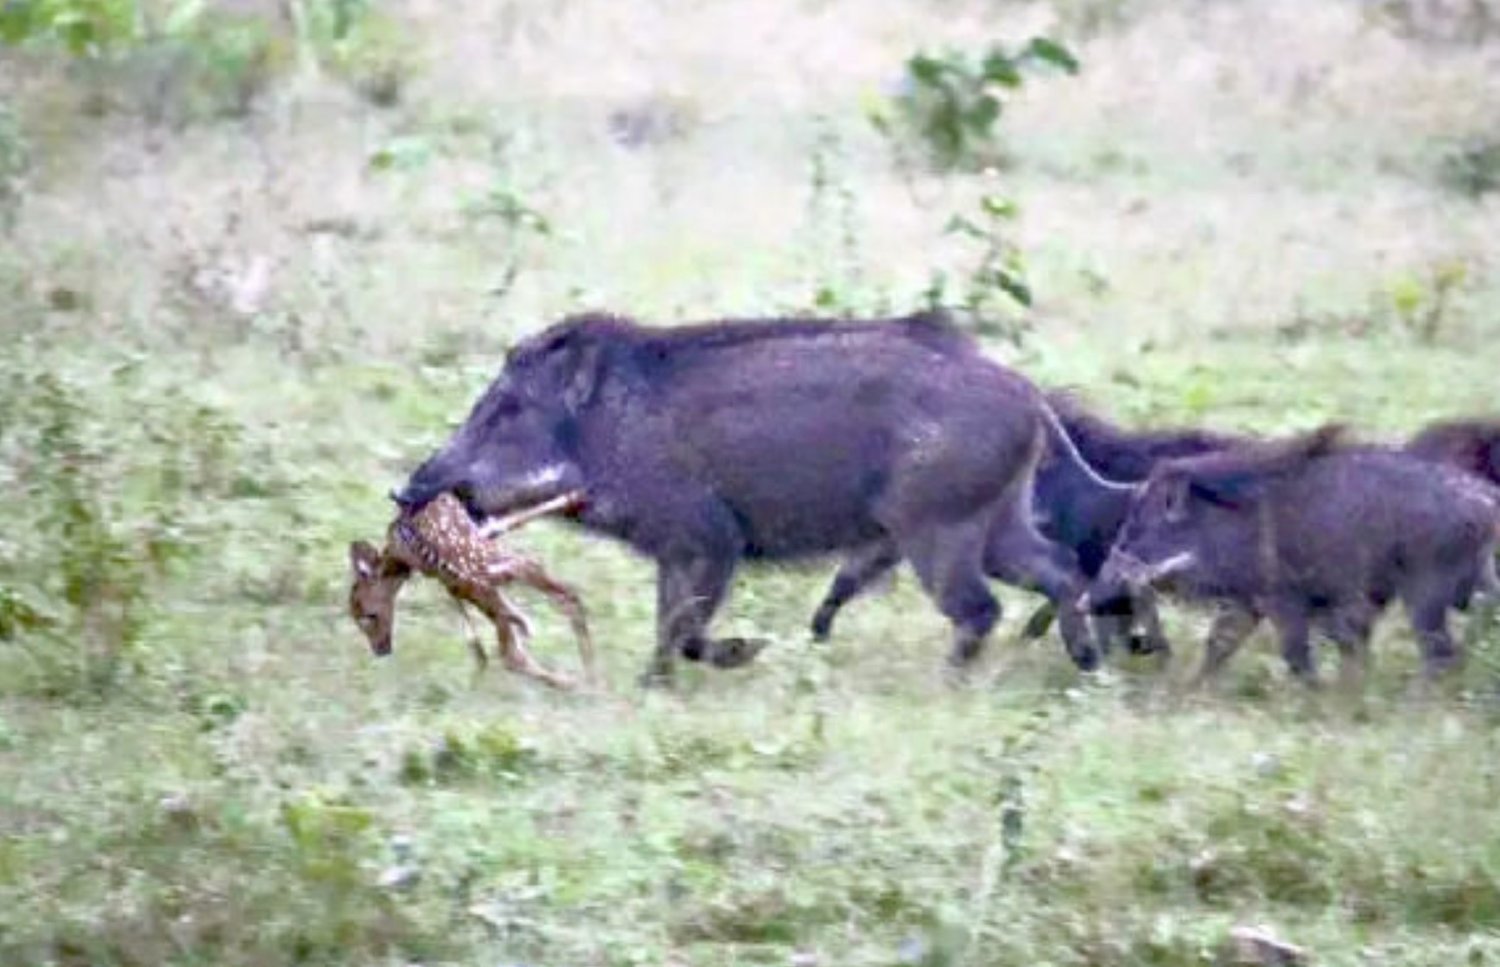 A courtesy photo from the Washington Invasive Species Council shows a feral hog killing a fawn deer.